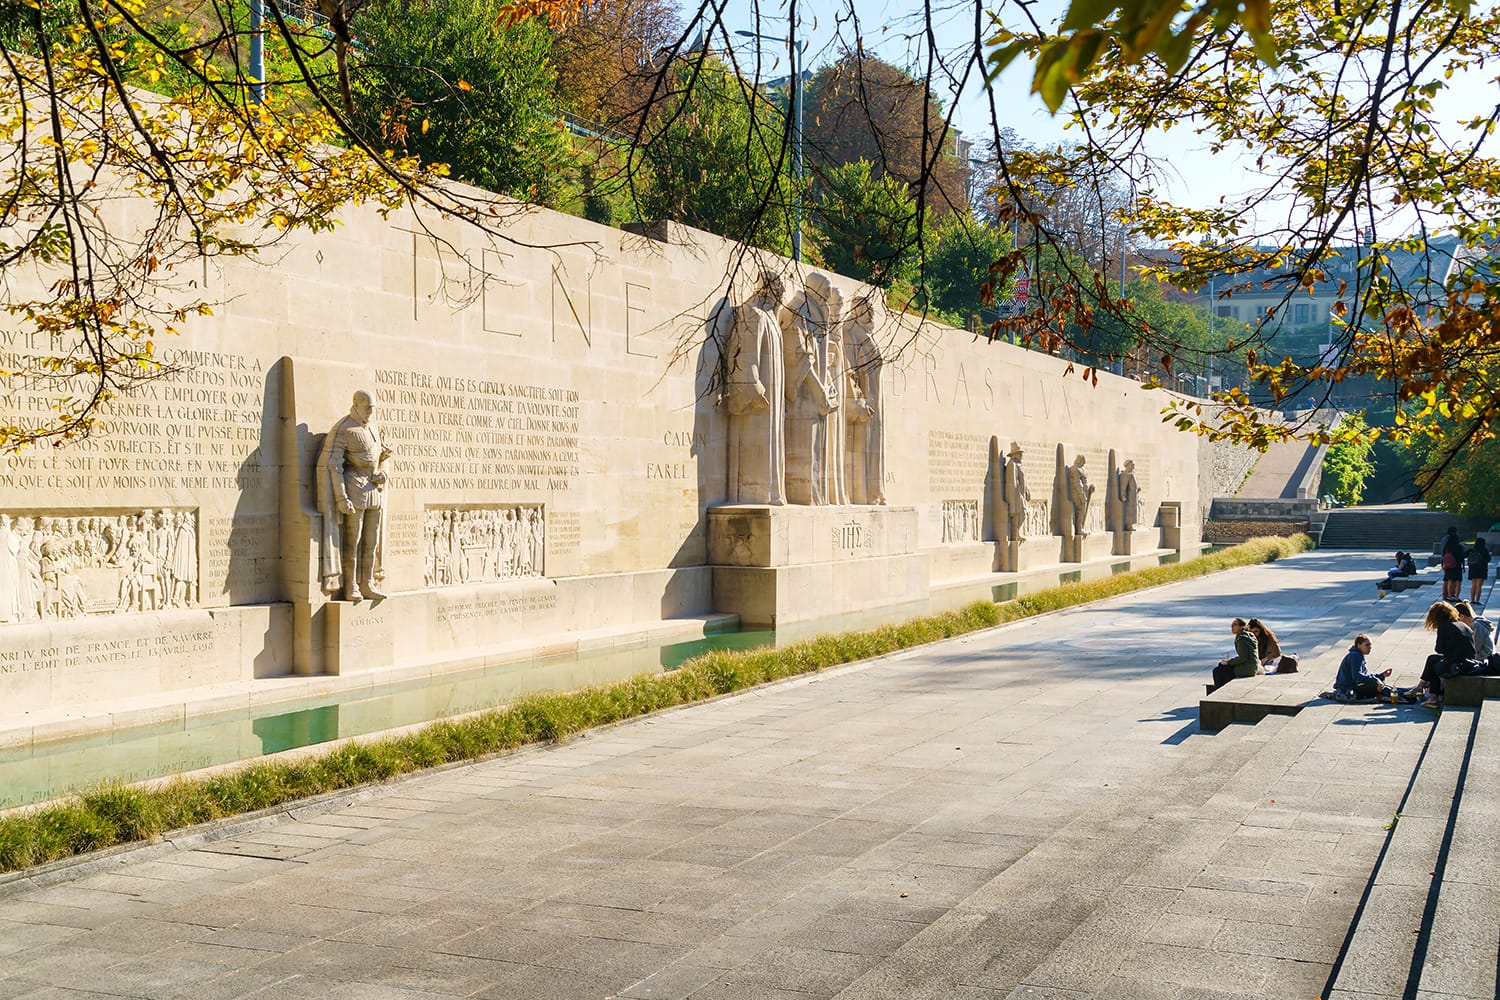 The International Monument to the Reformation or Reformation Wall in Geneva, Switzerland